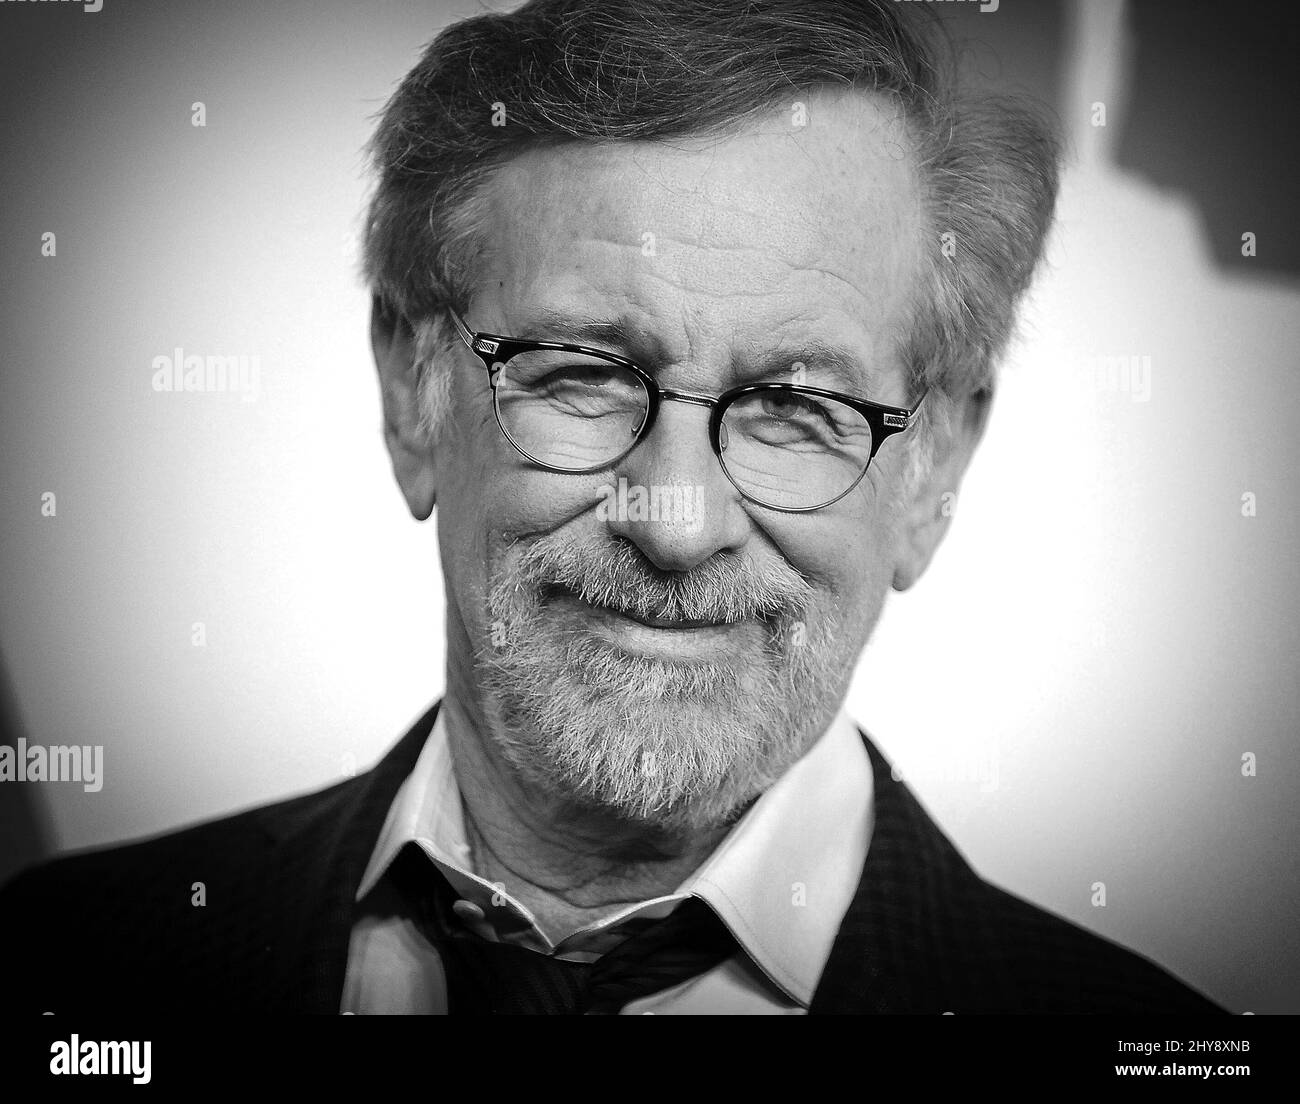 Steven Spielberg attending the Oscar Nominees Luncheon held at the Beverly Hilton Hotel, Beverly Hills, Los Angeles. Stock Photo